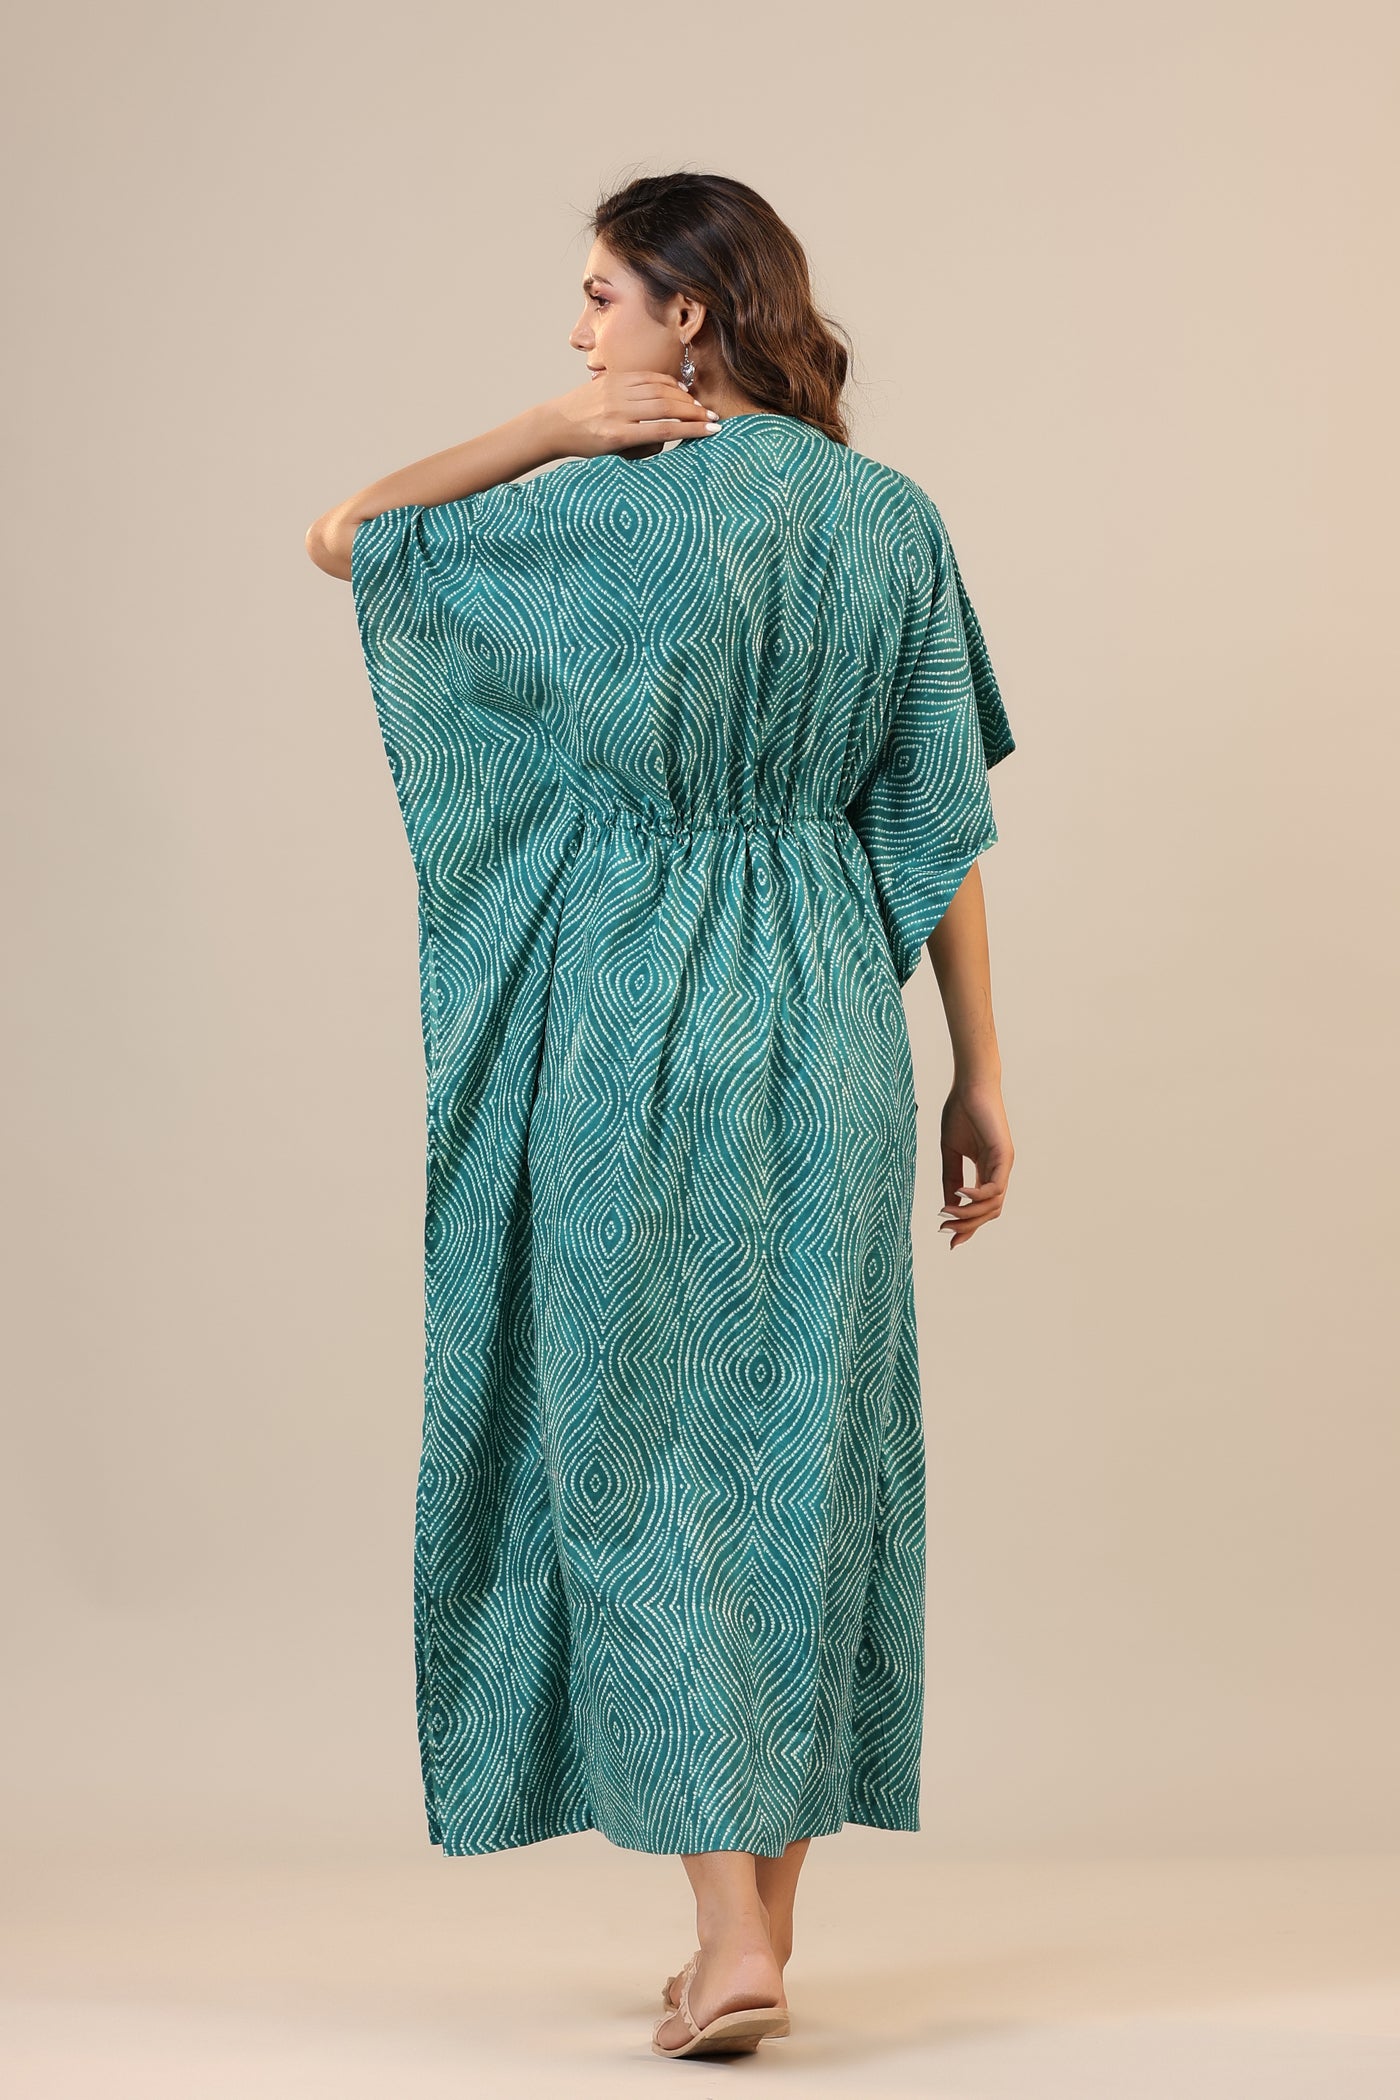 Patterned Shibori on Teal Front Buttoned Kaftan